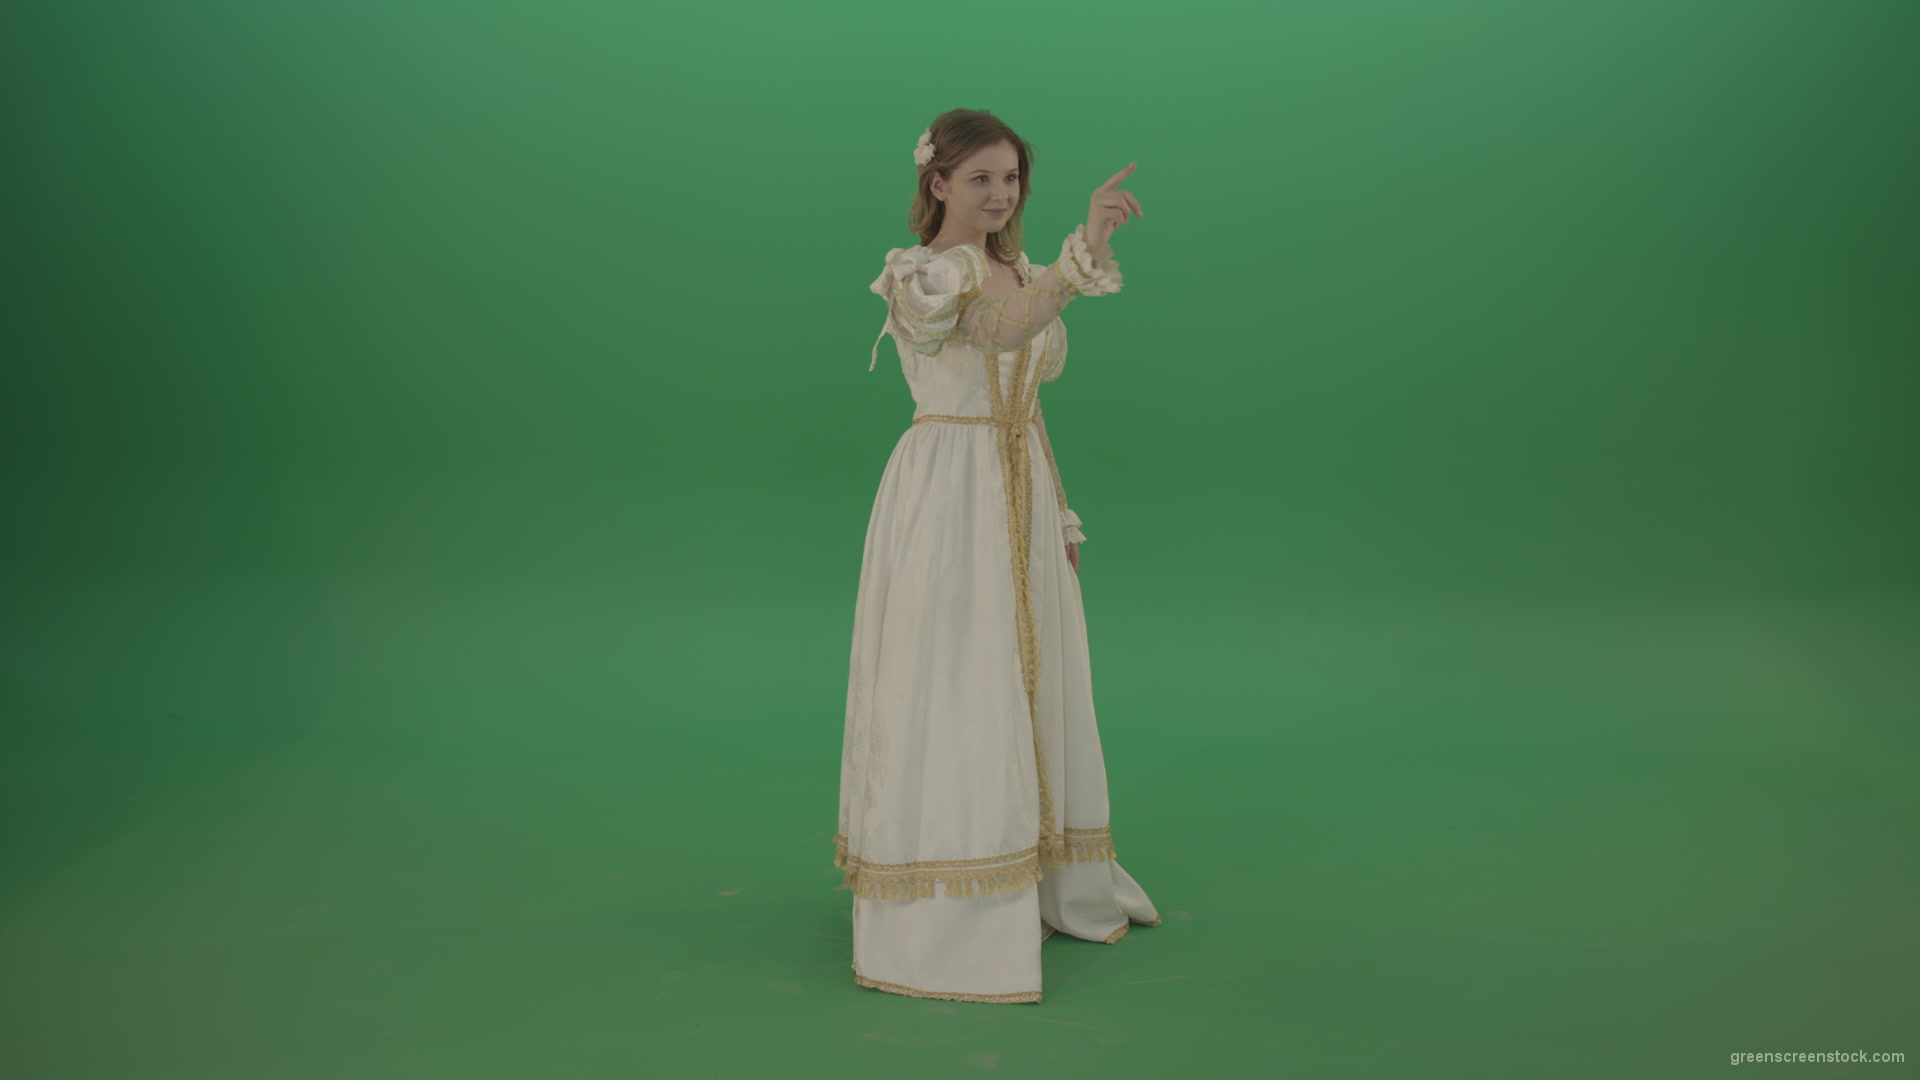 Flips-touchscreen-in-a-white-suit-of-a-medieval-woman-isolated-on-green-screen_007 Green Screen Stock